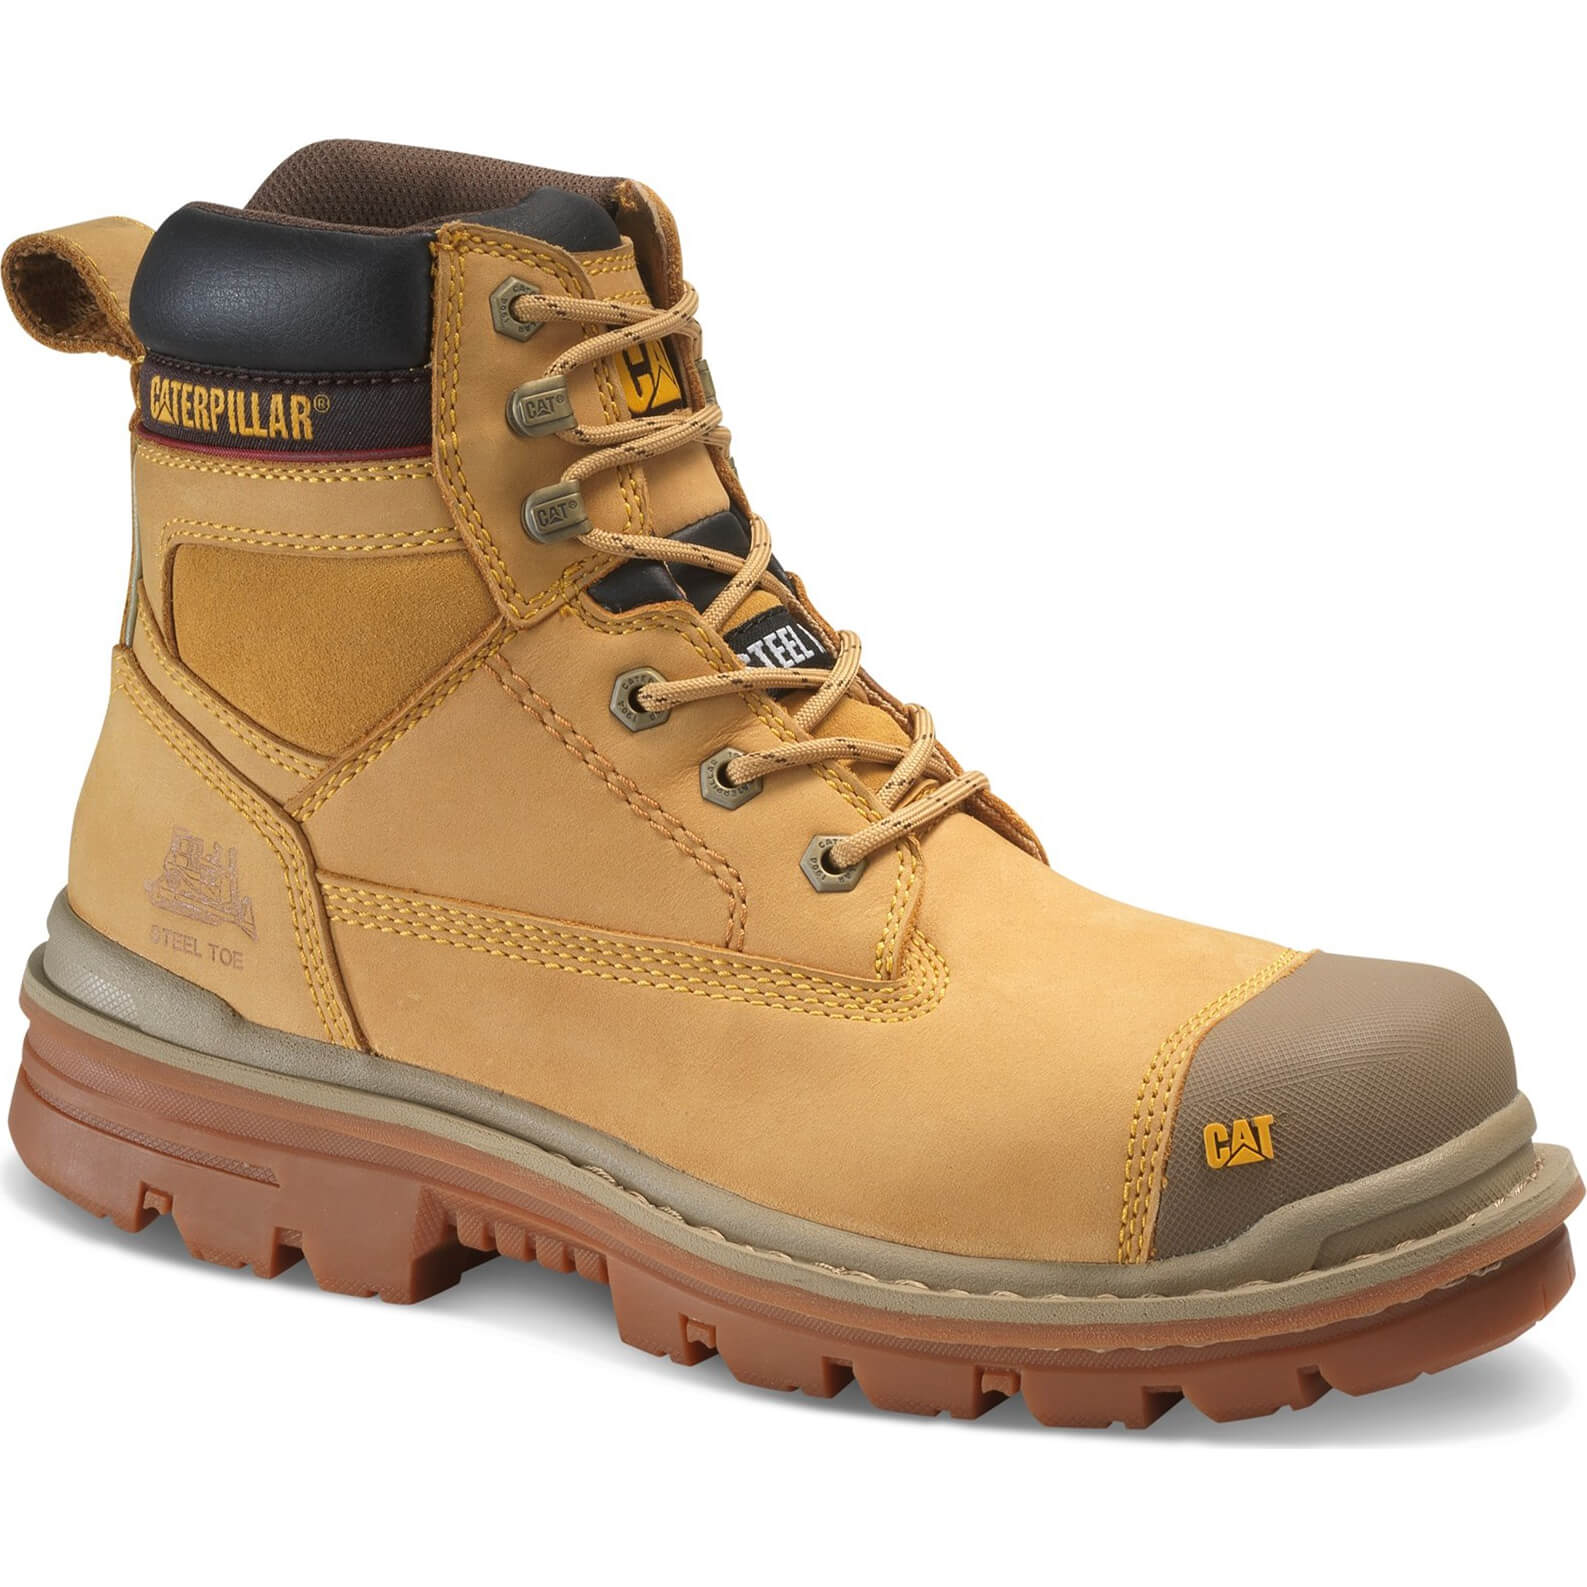 Image of Caterpillar Mens Gravel Safety Boots Honey Size 12